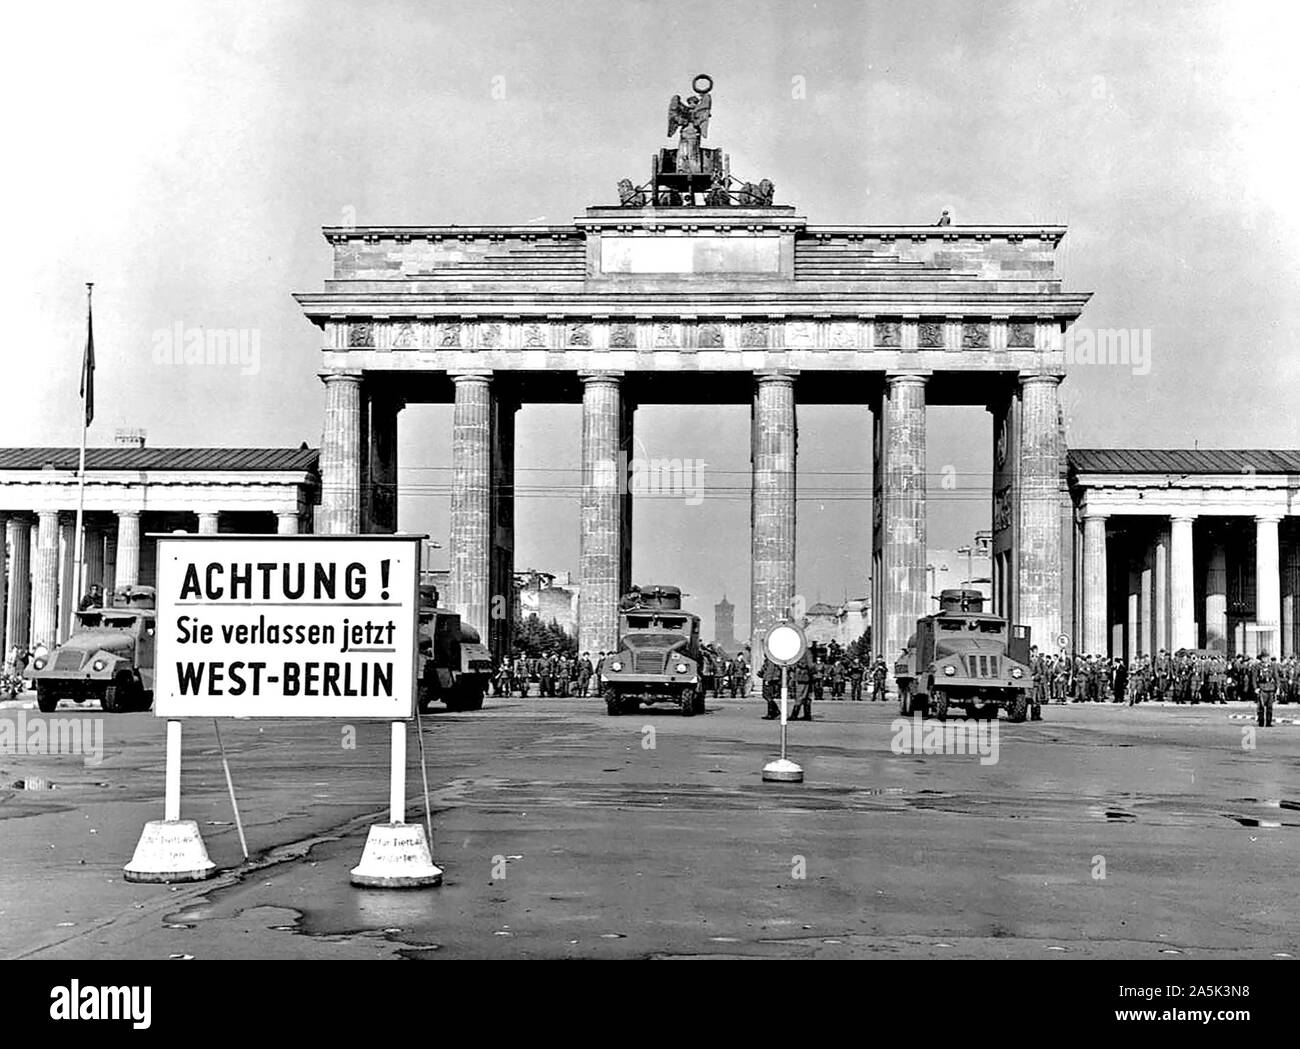 Original caption: East Berlin Put Behind Iron Curtain  Berlin, August 1961 - In a final attempt to halt a flood of refugees escaping from East Germany through West Berlin, the Communist Government of the Soviet Zone moved on August 13th to block off East Berlin with troops, road blocks and barbed wire. Heavily armed East German forces, backed up by Soviet army units, patrolled the East Sector to prevent disturbances while the free West Berliners, angered by the Communist action, demonstrated on their side of the border in sympathy with those now cut off from any contact with the West.  Militar Stock Photo